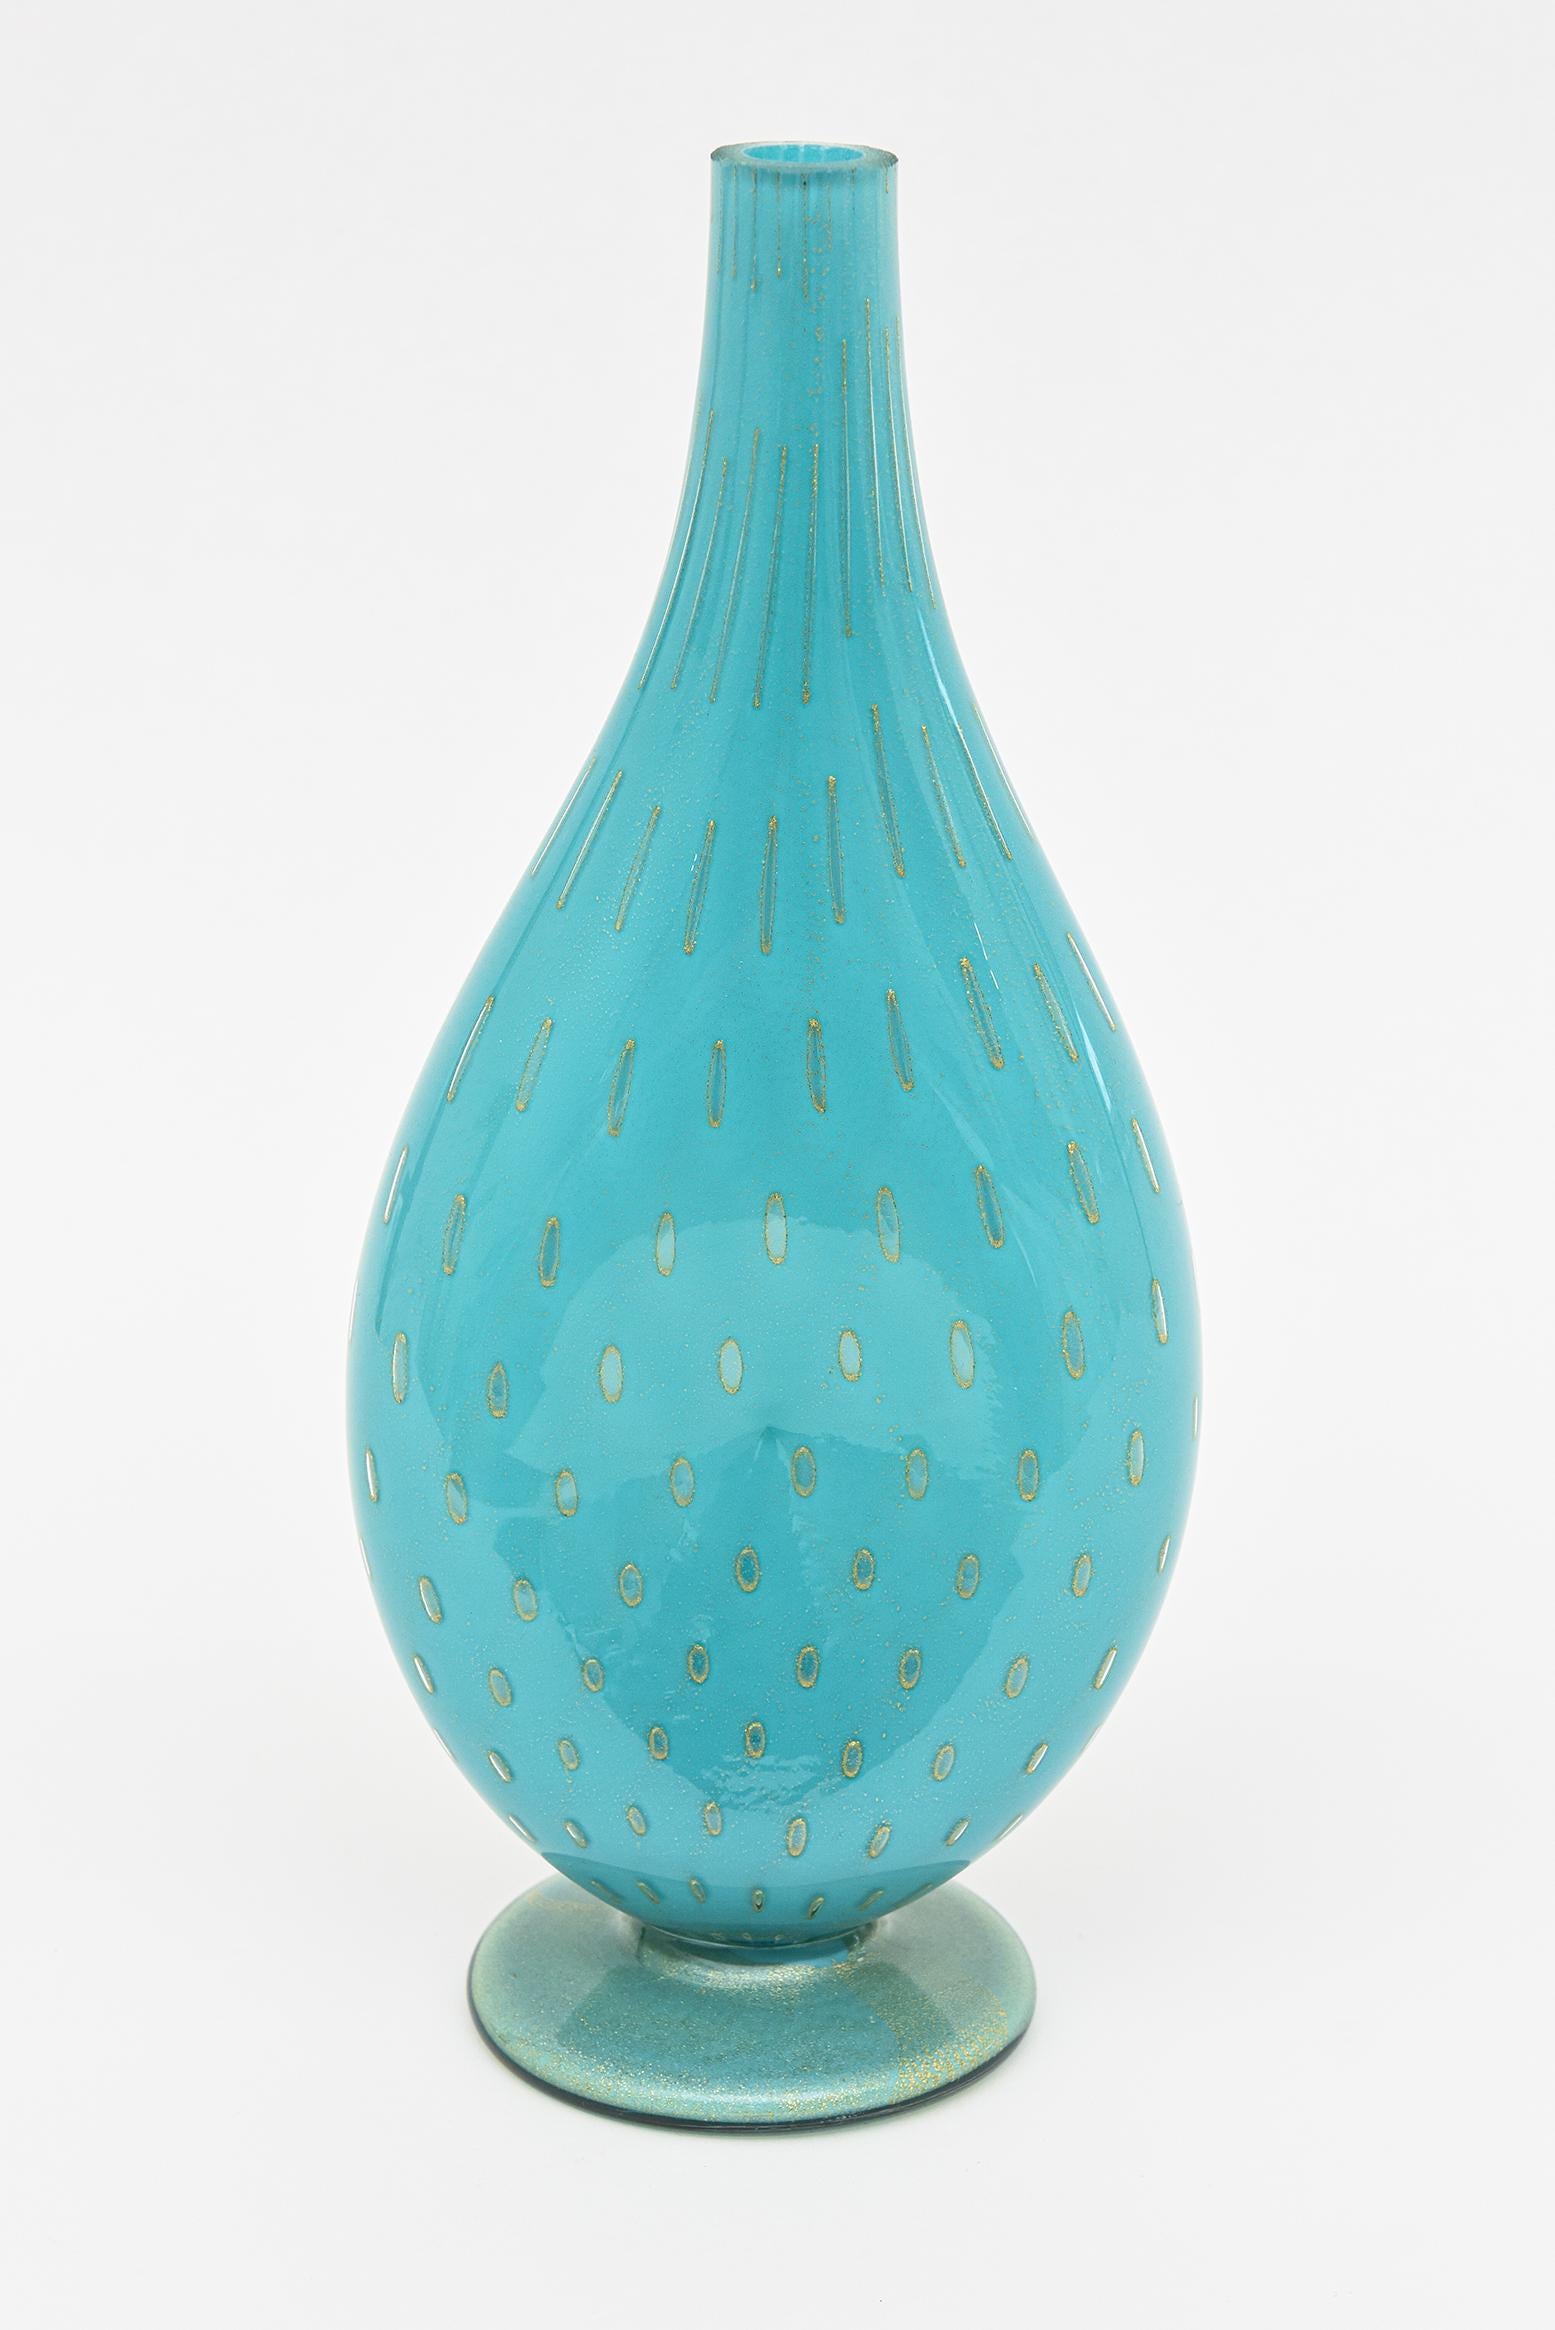 Vintage Barovier e Toso Murano Turquoise Glass Vessel Bottle With Gold Droplets For Sale 4